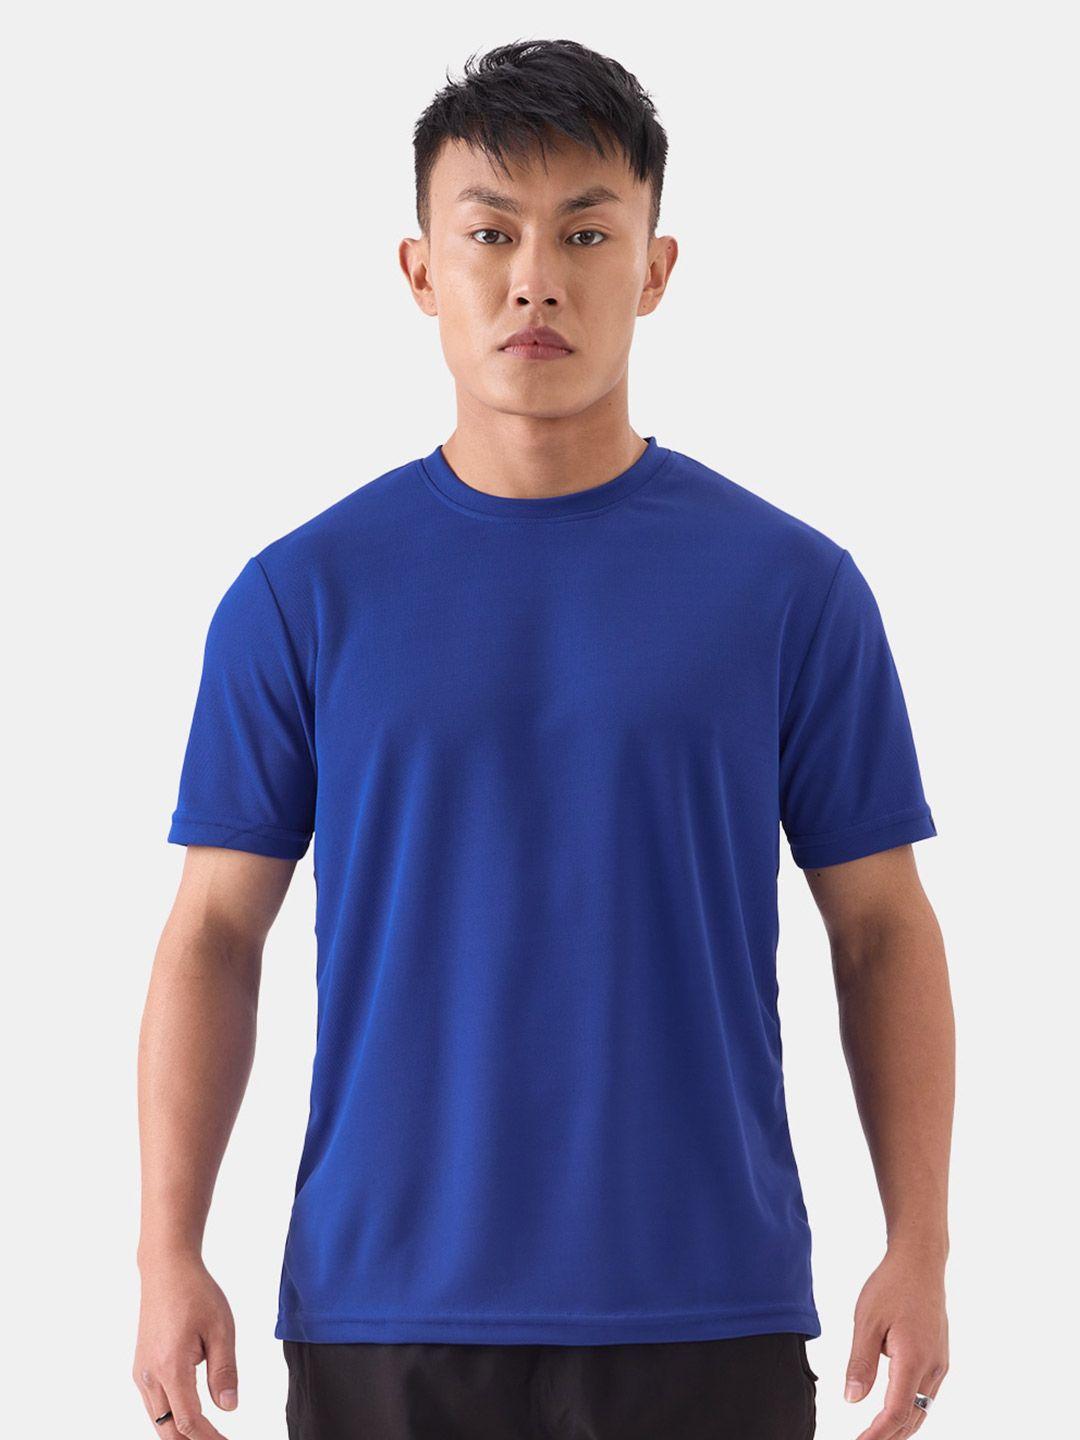 the souled store blue running sports t-shirt